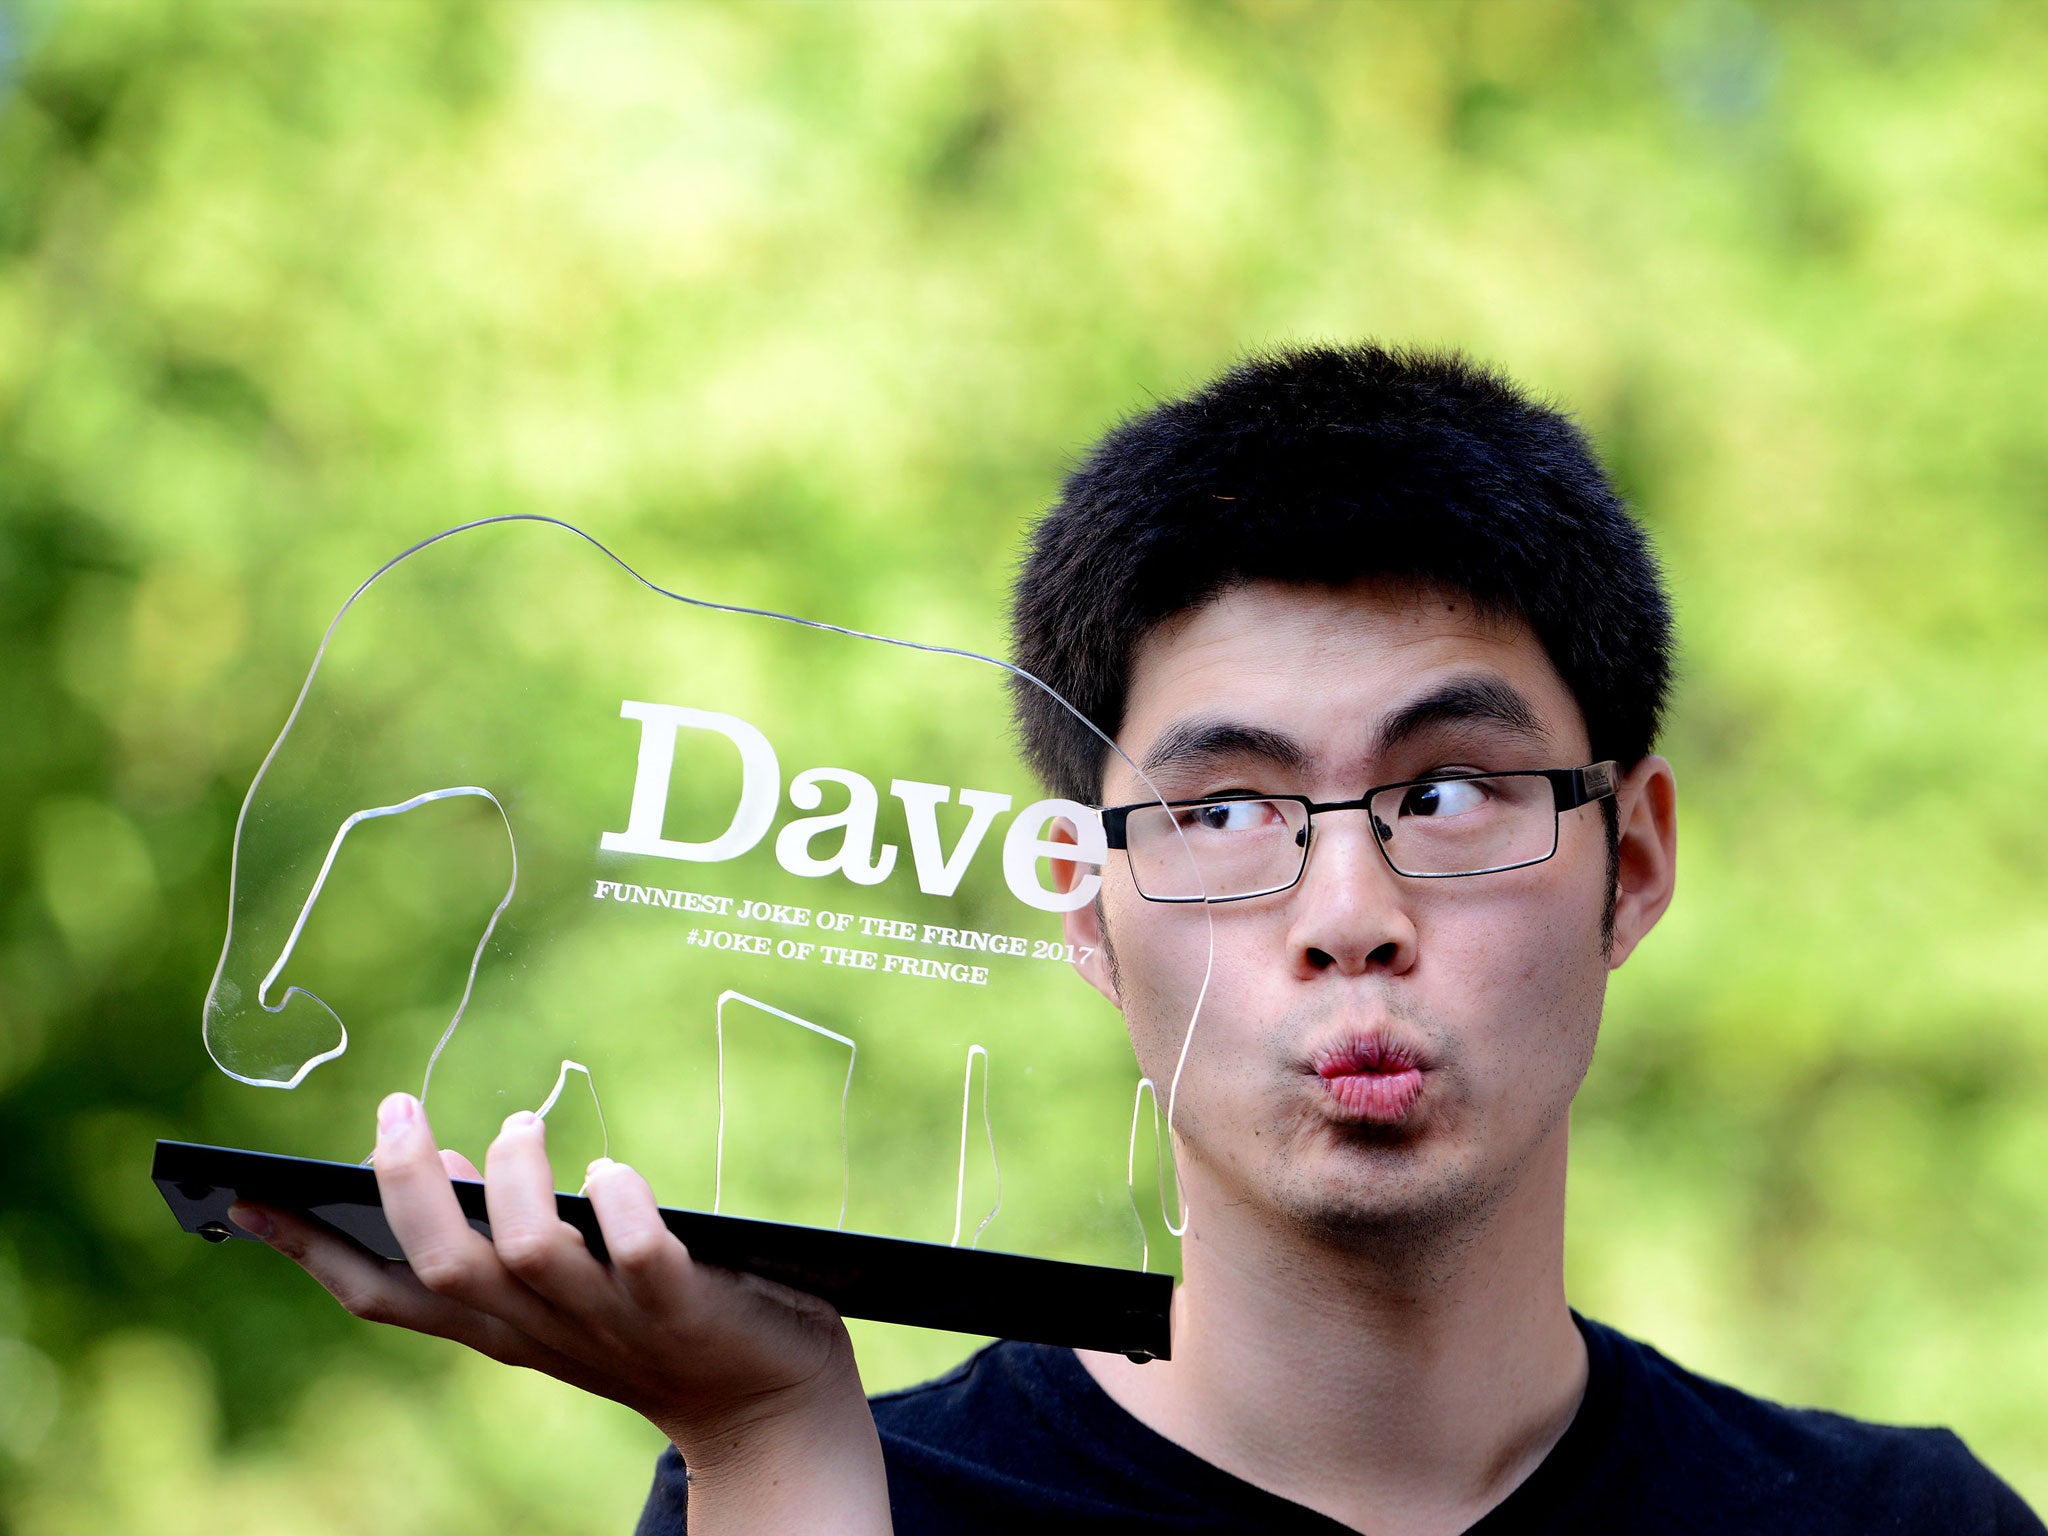 Comedian Ken Cheng, who has won the 10th annual award for Dave's Funniest Joke Of The Edinburgh Fringe